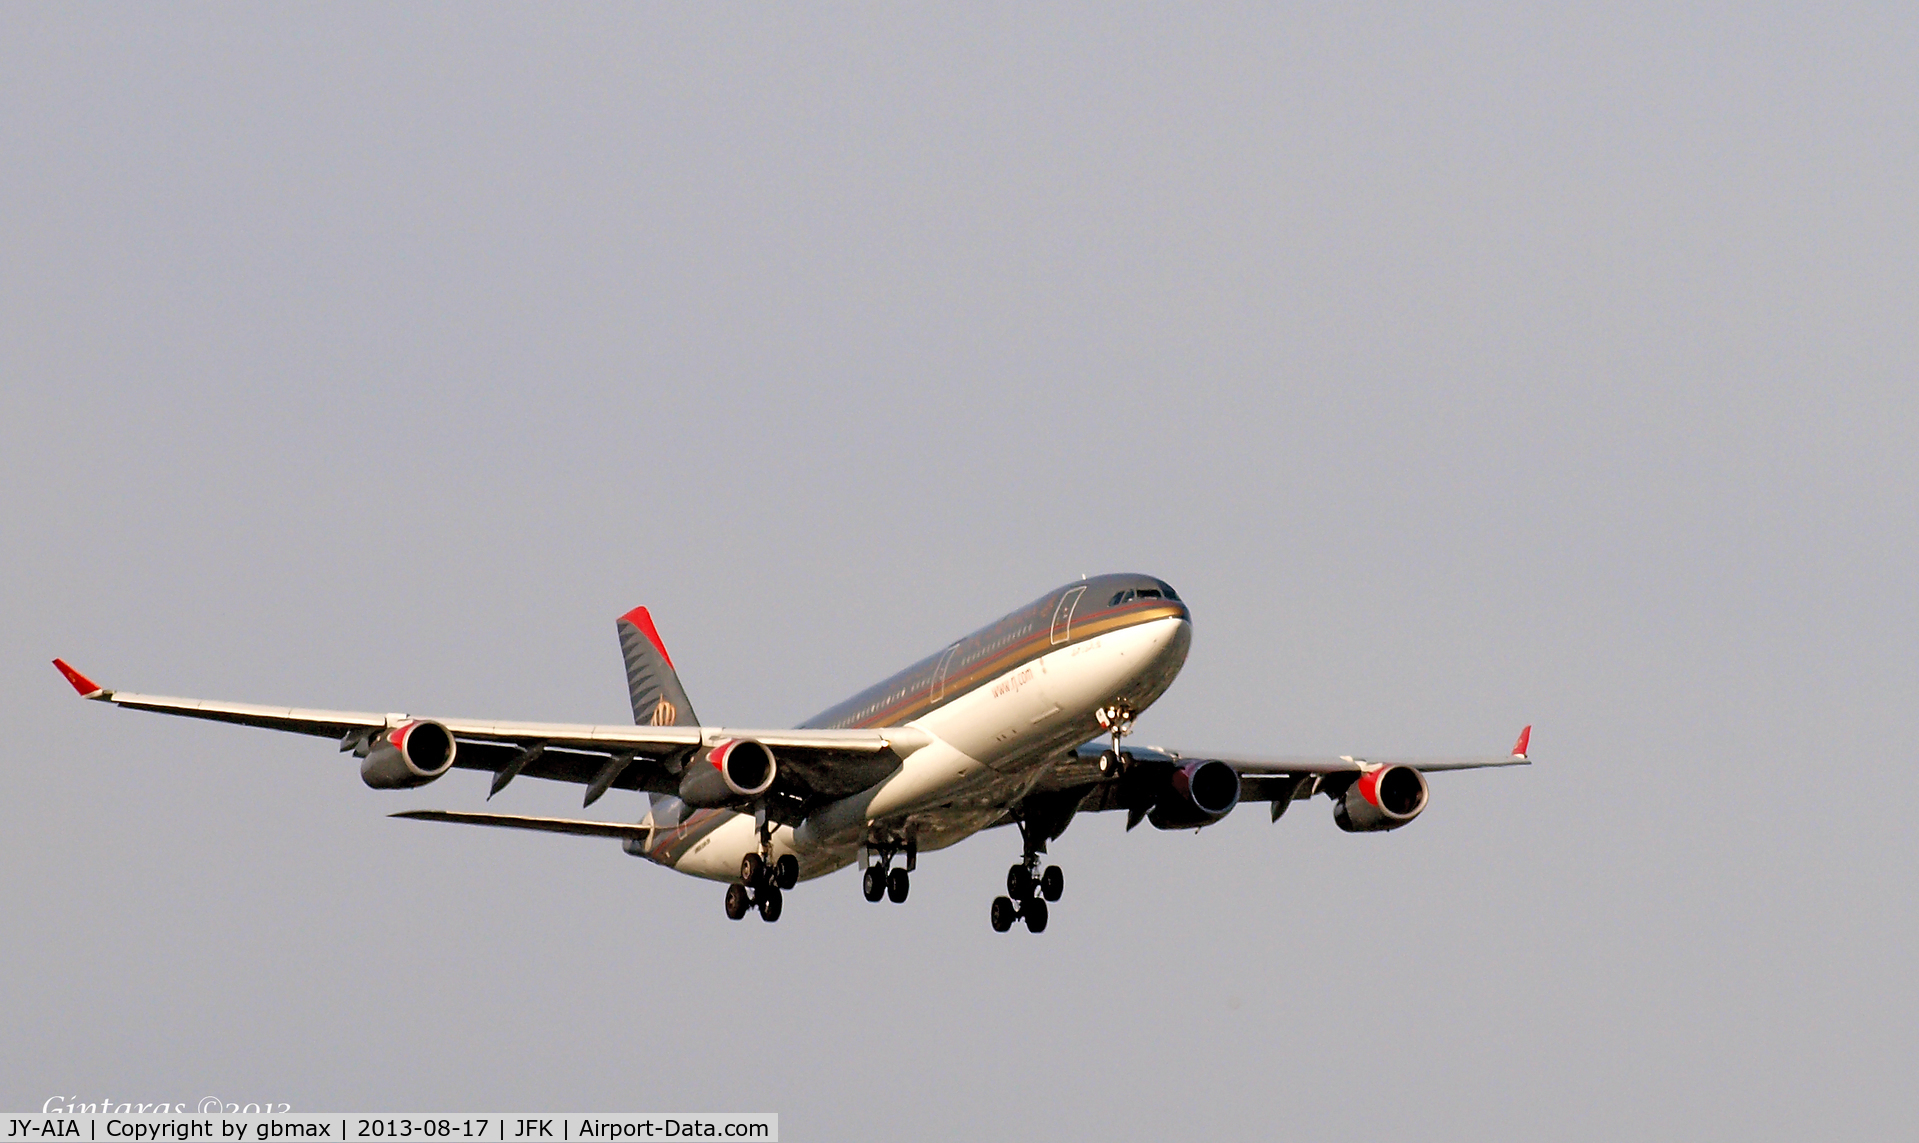 JY-AIA, 1993 Airbus A340-211 C/N 038, Seconds before landing on L22, JFK